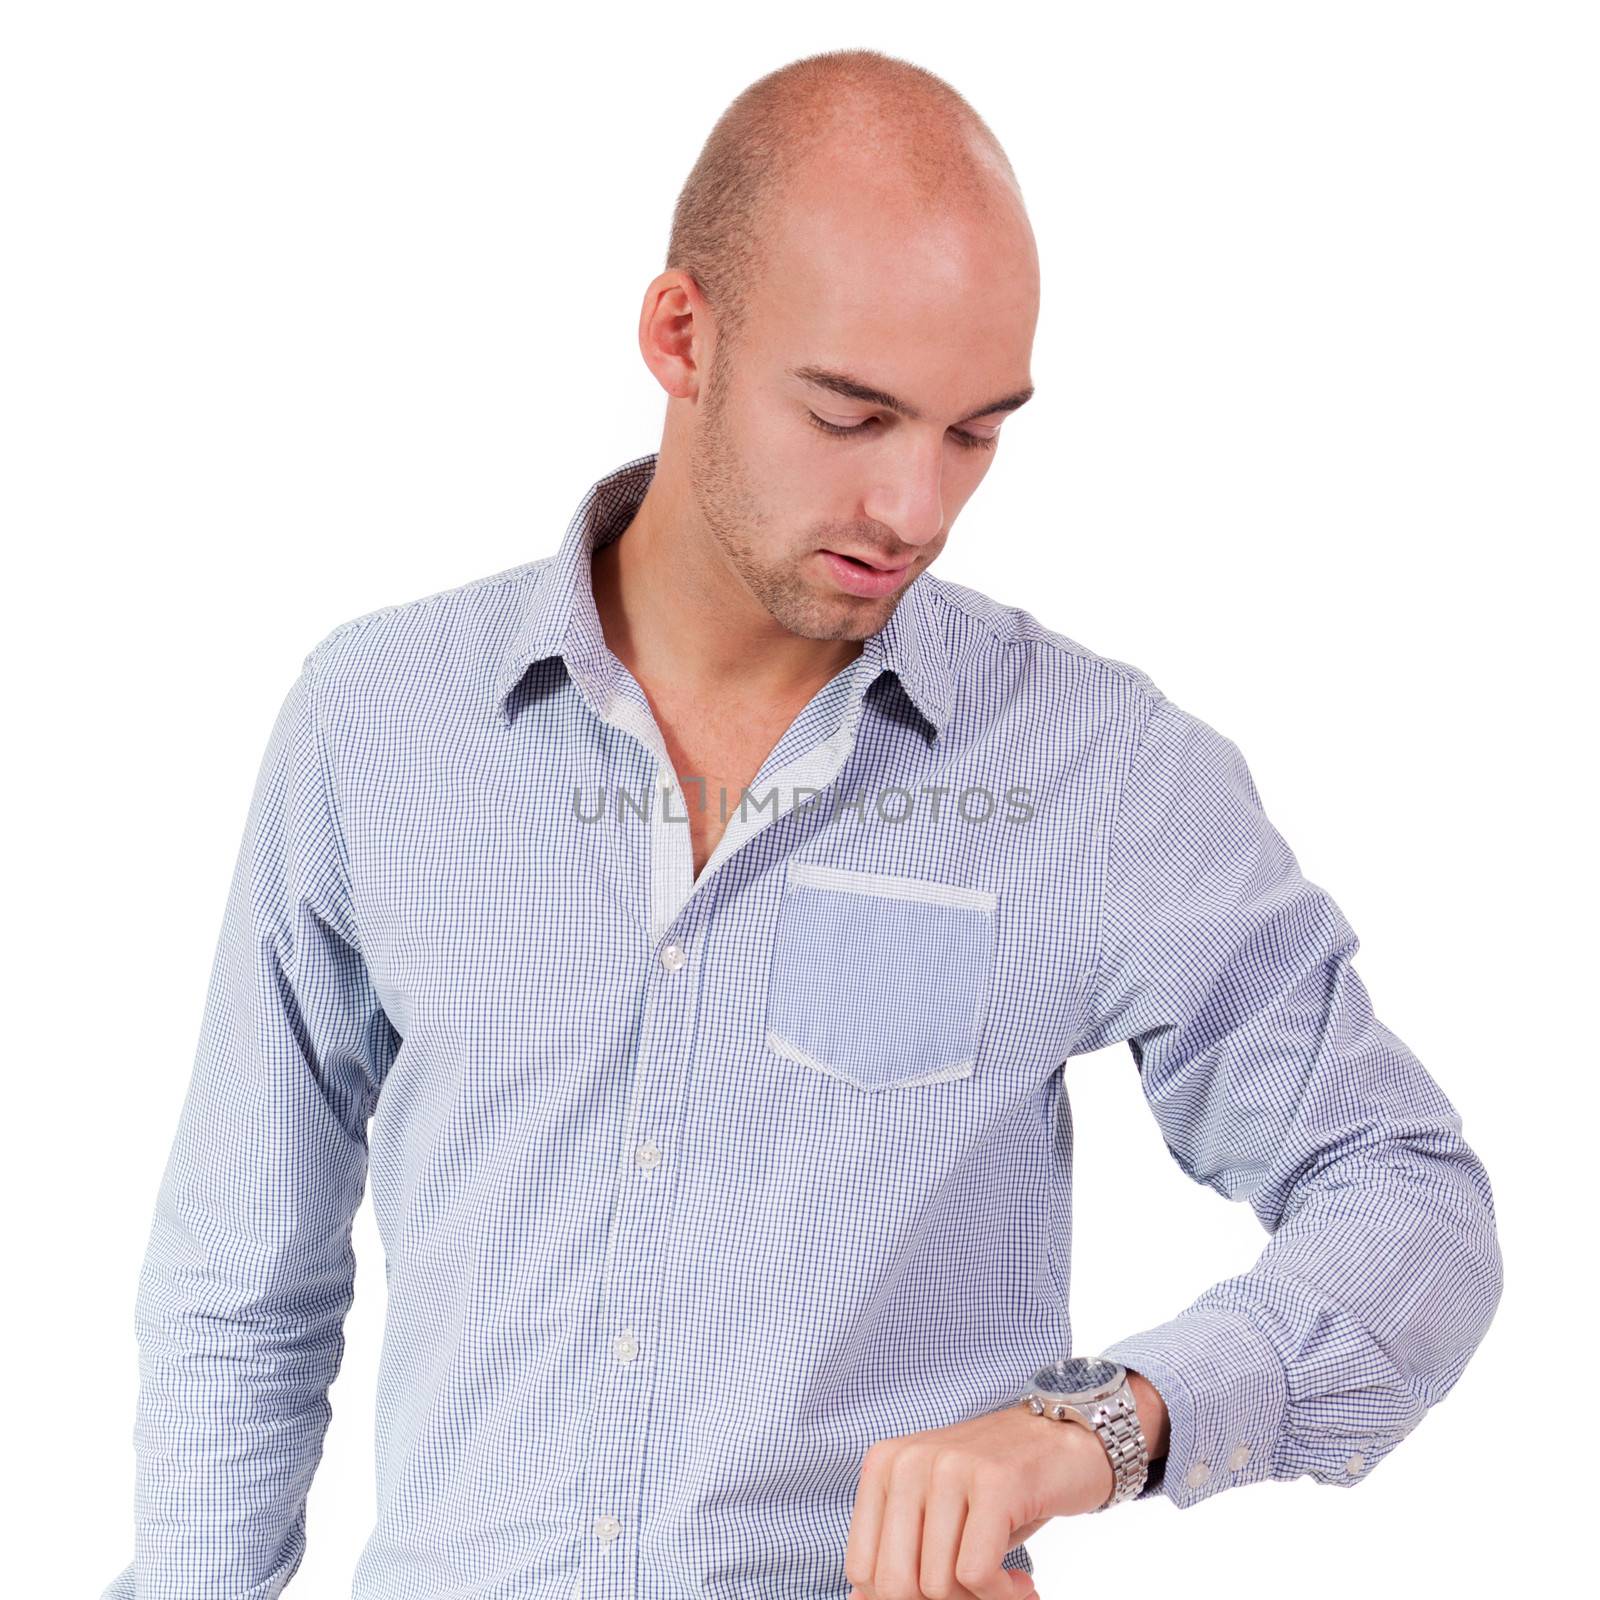 young adult business man looking at watch portrait isolated